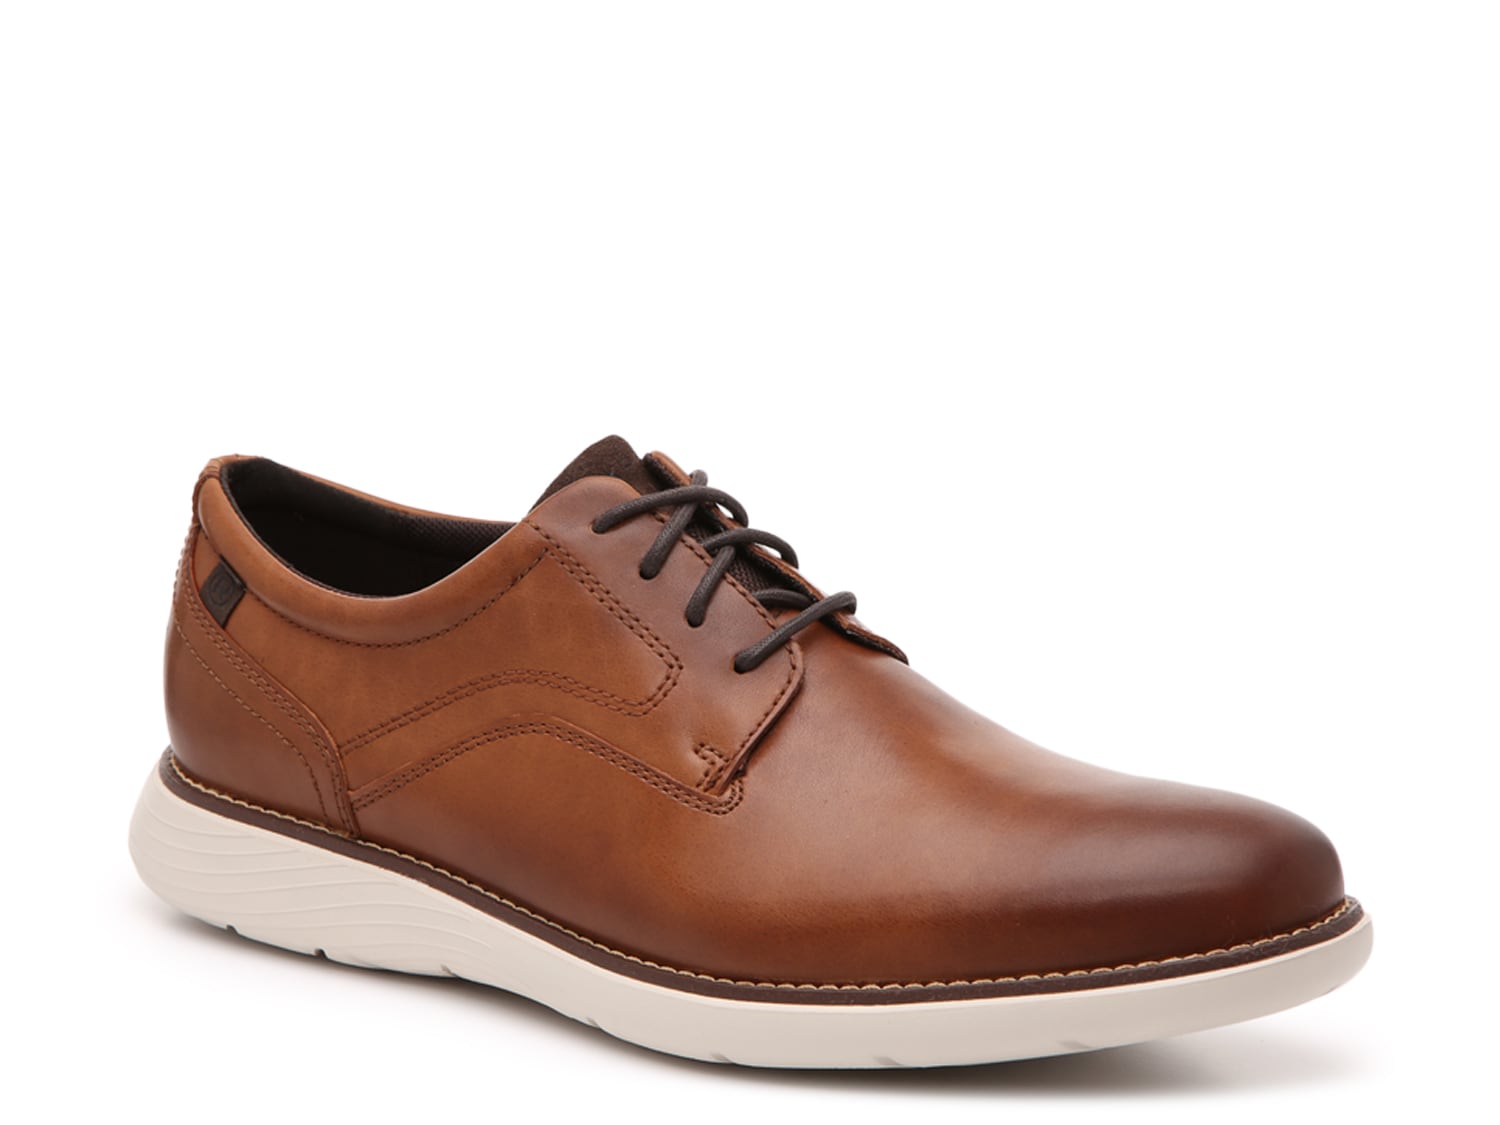 dsw mens casual dress shoes